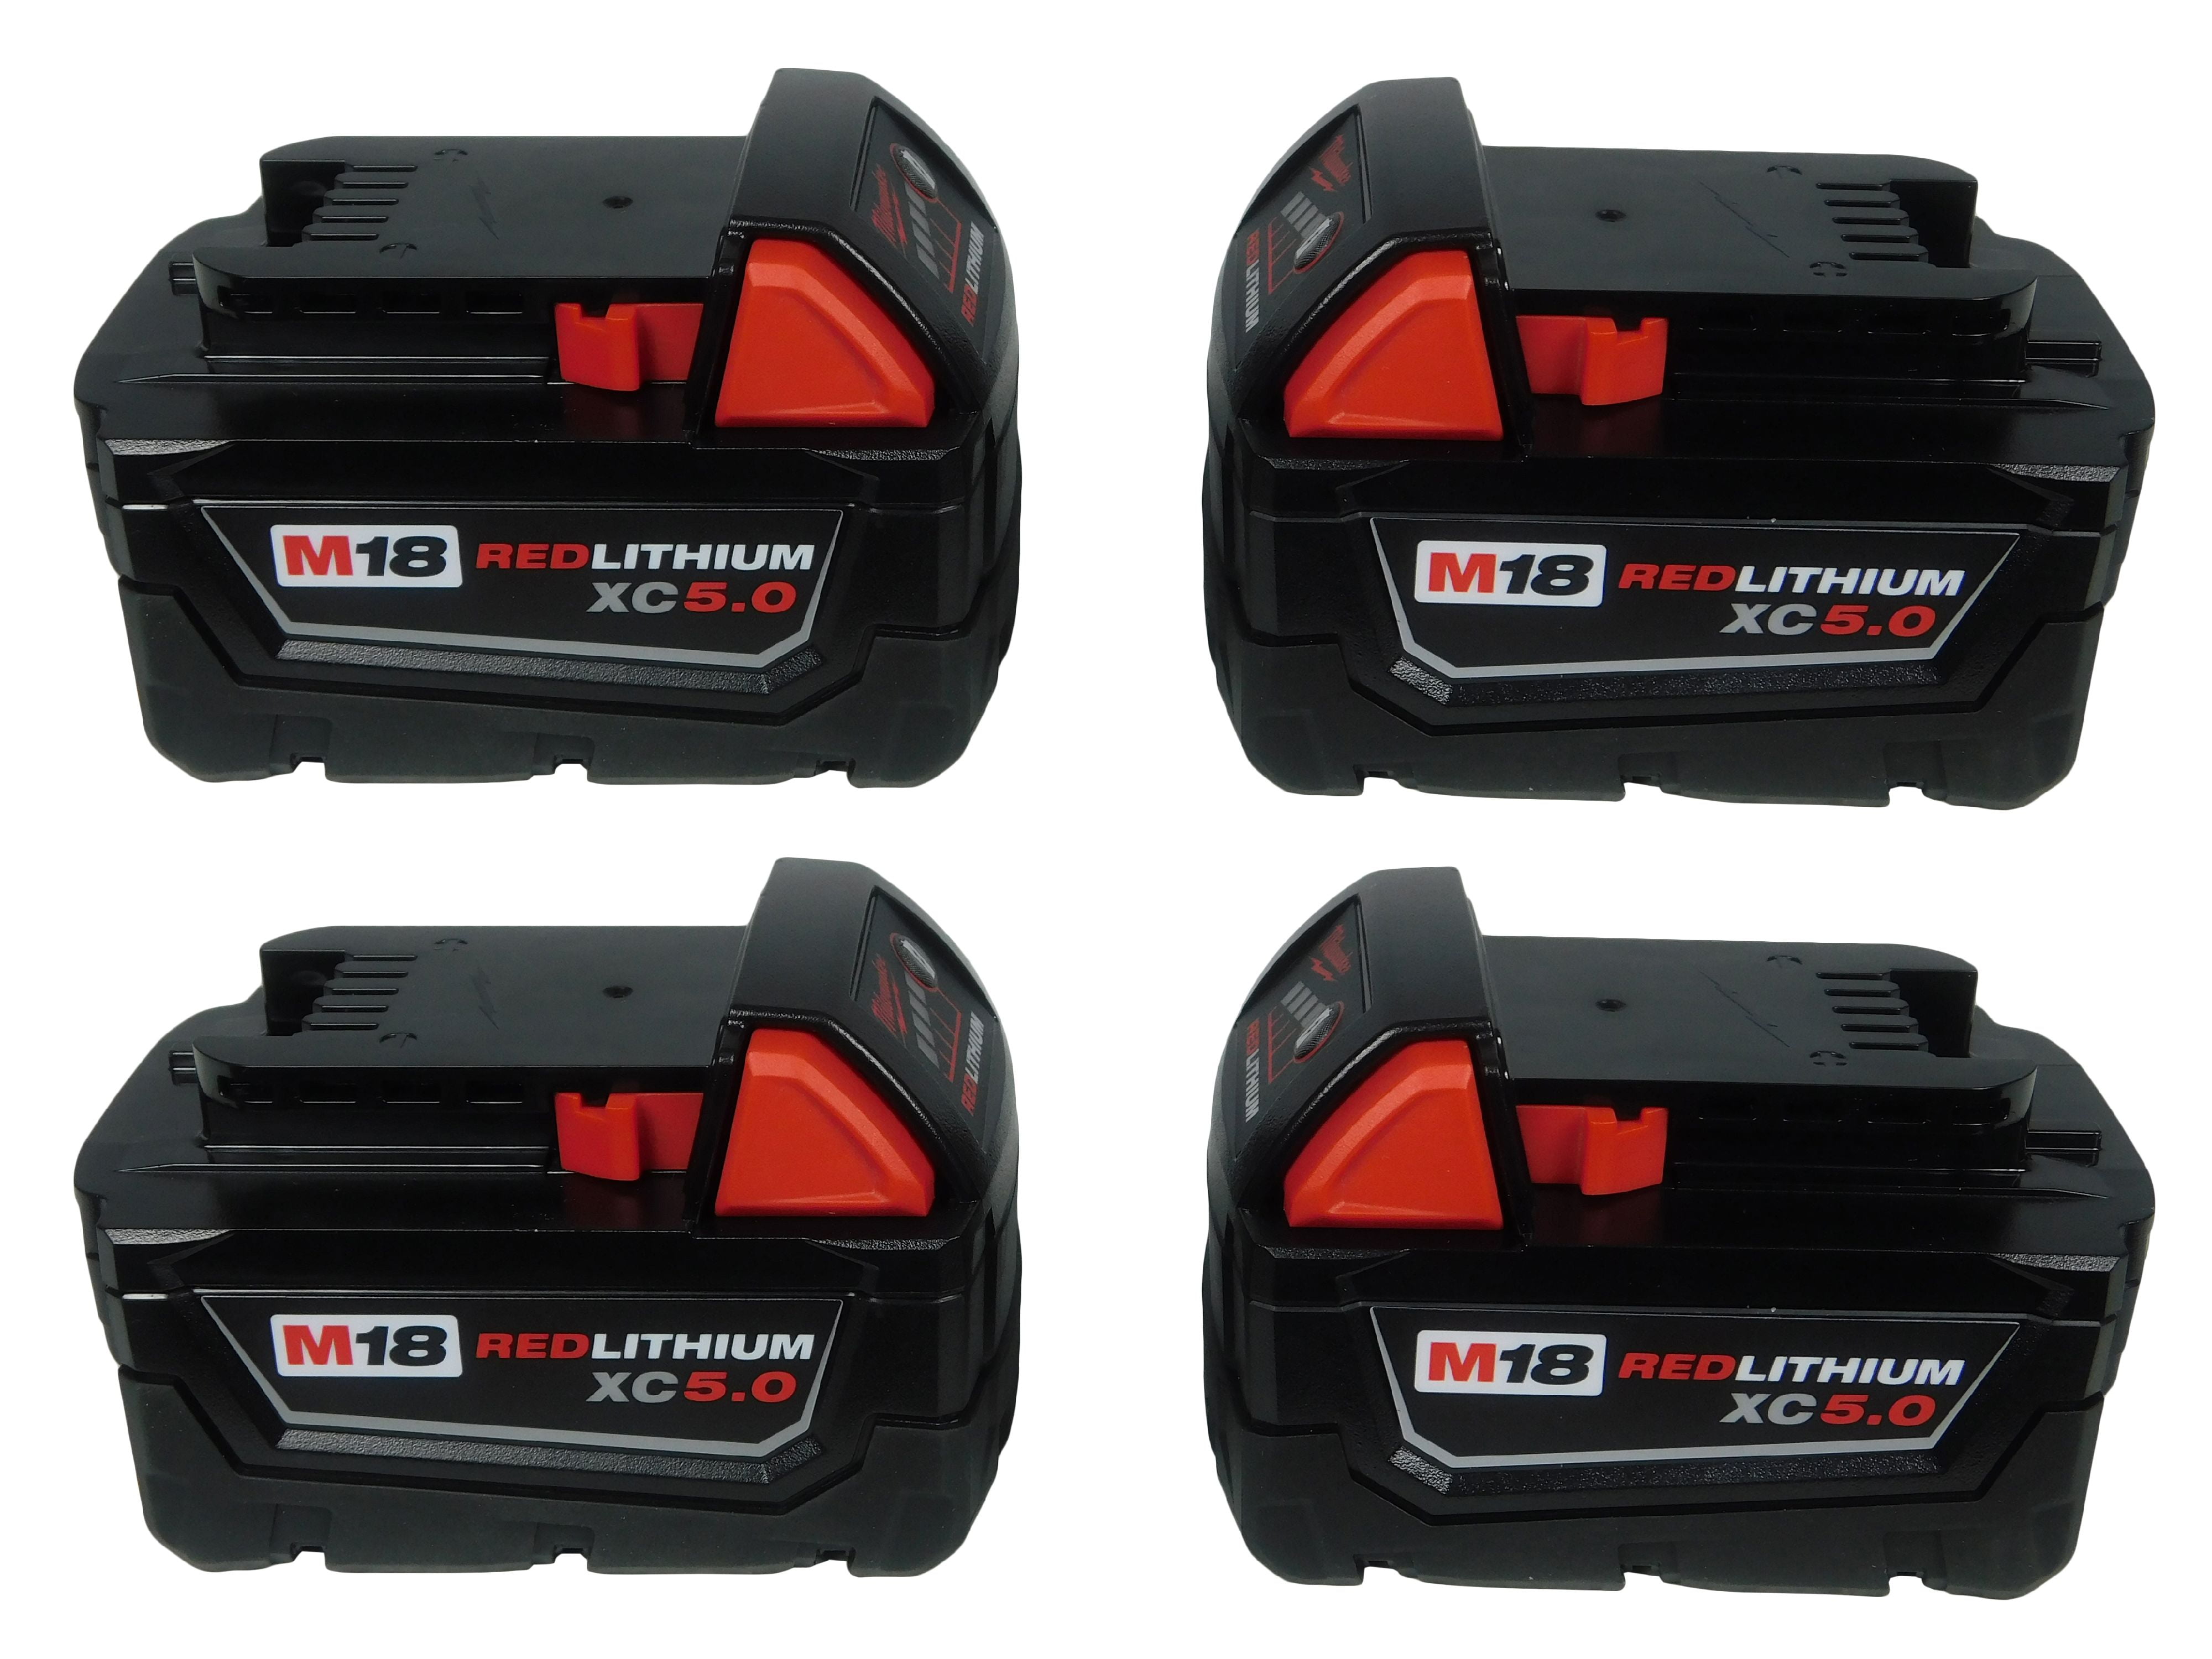 48-11-1850 for sale online Milwaukee M18 REDLITHIUM XC5.0 Extended Capacity Battery Pack